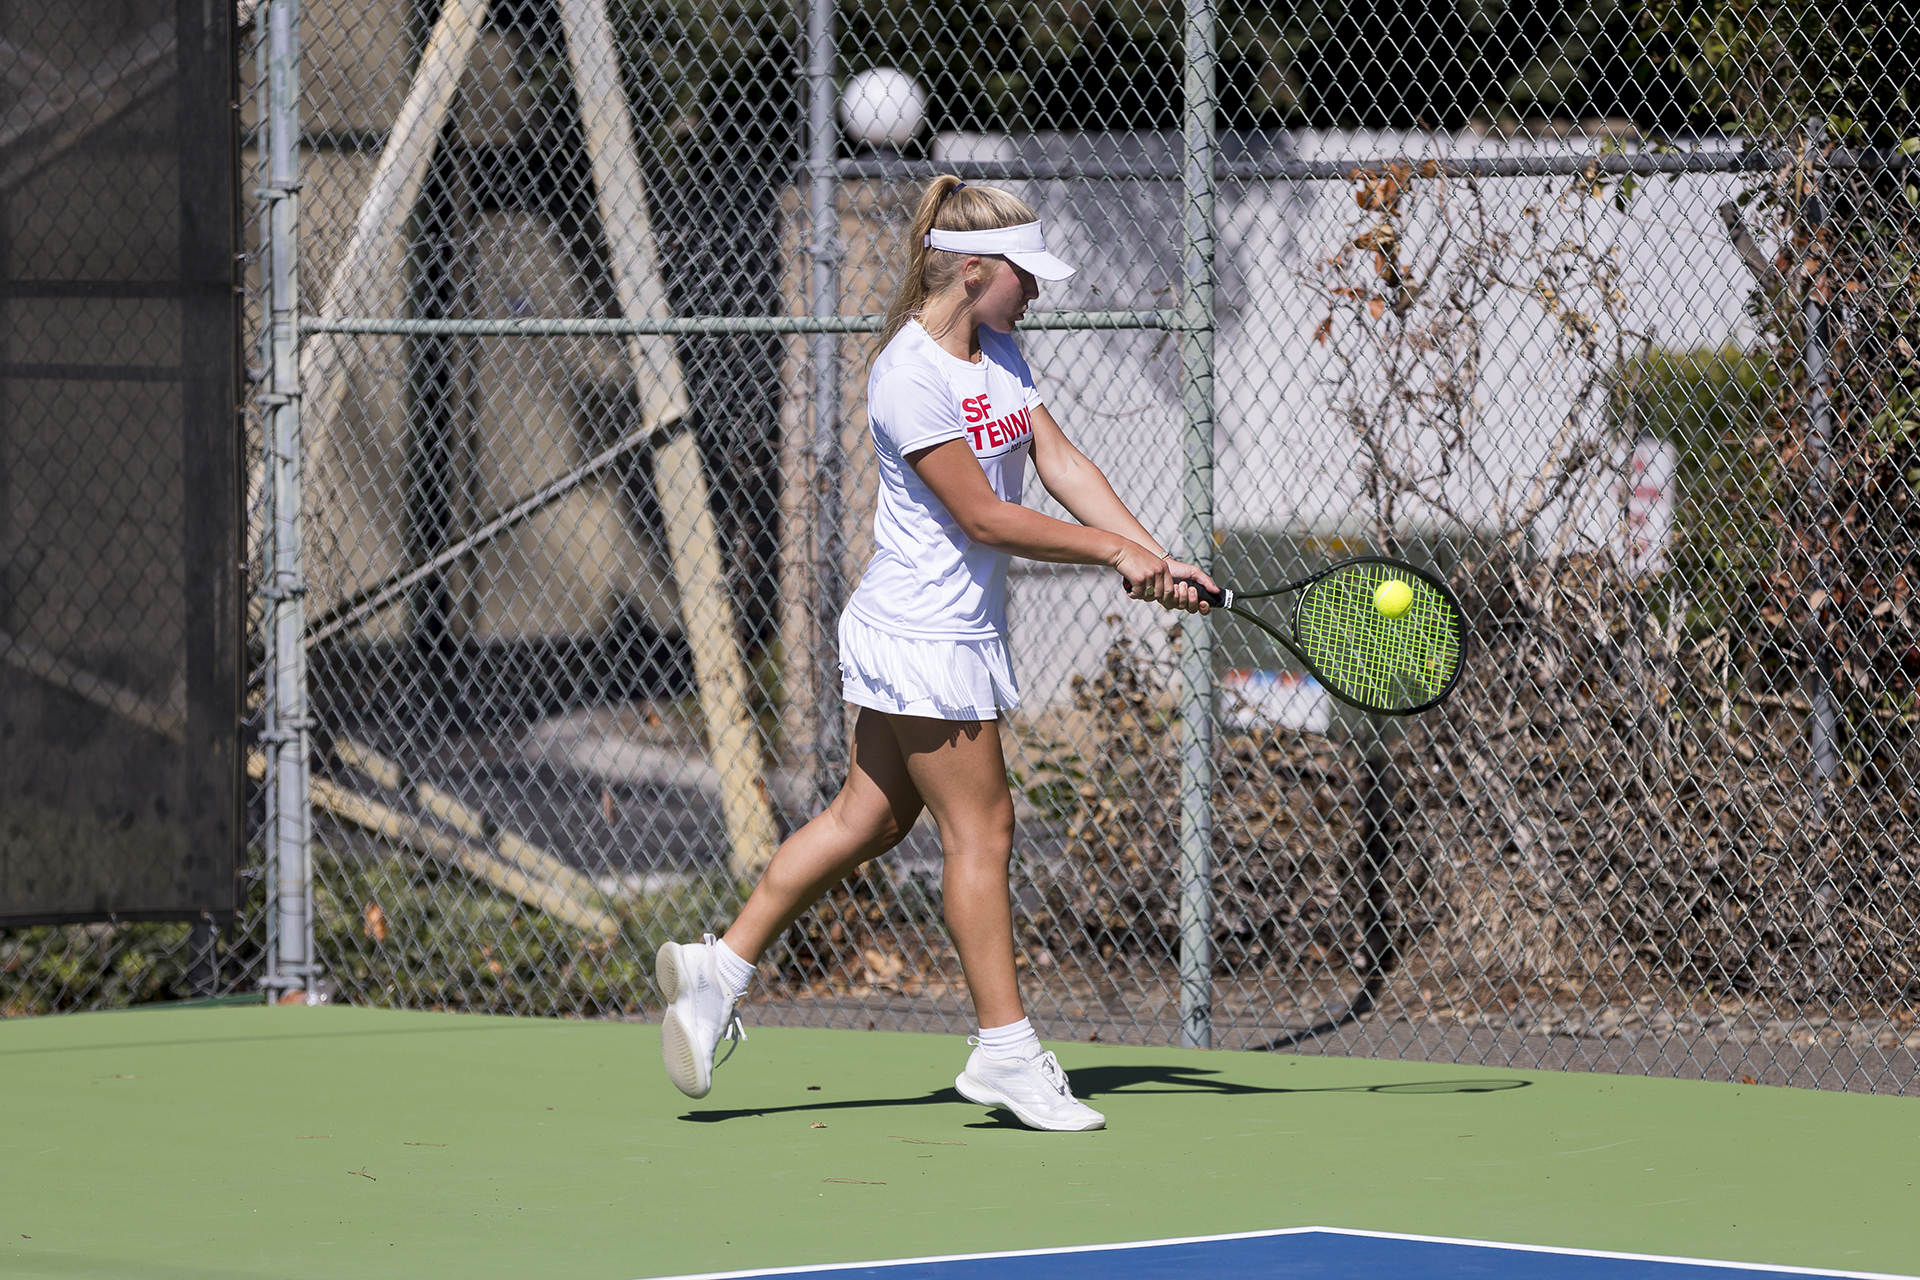 PG finishes off Troubies in resumed tennis dual